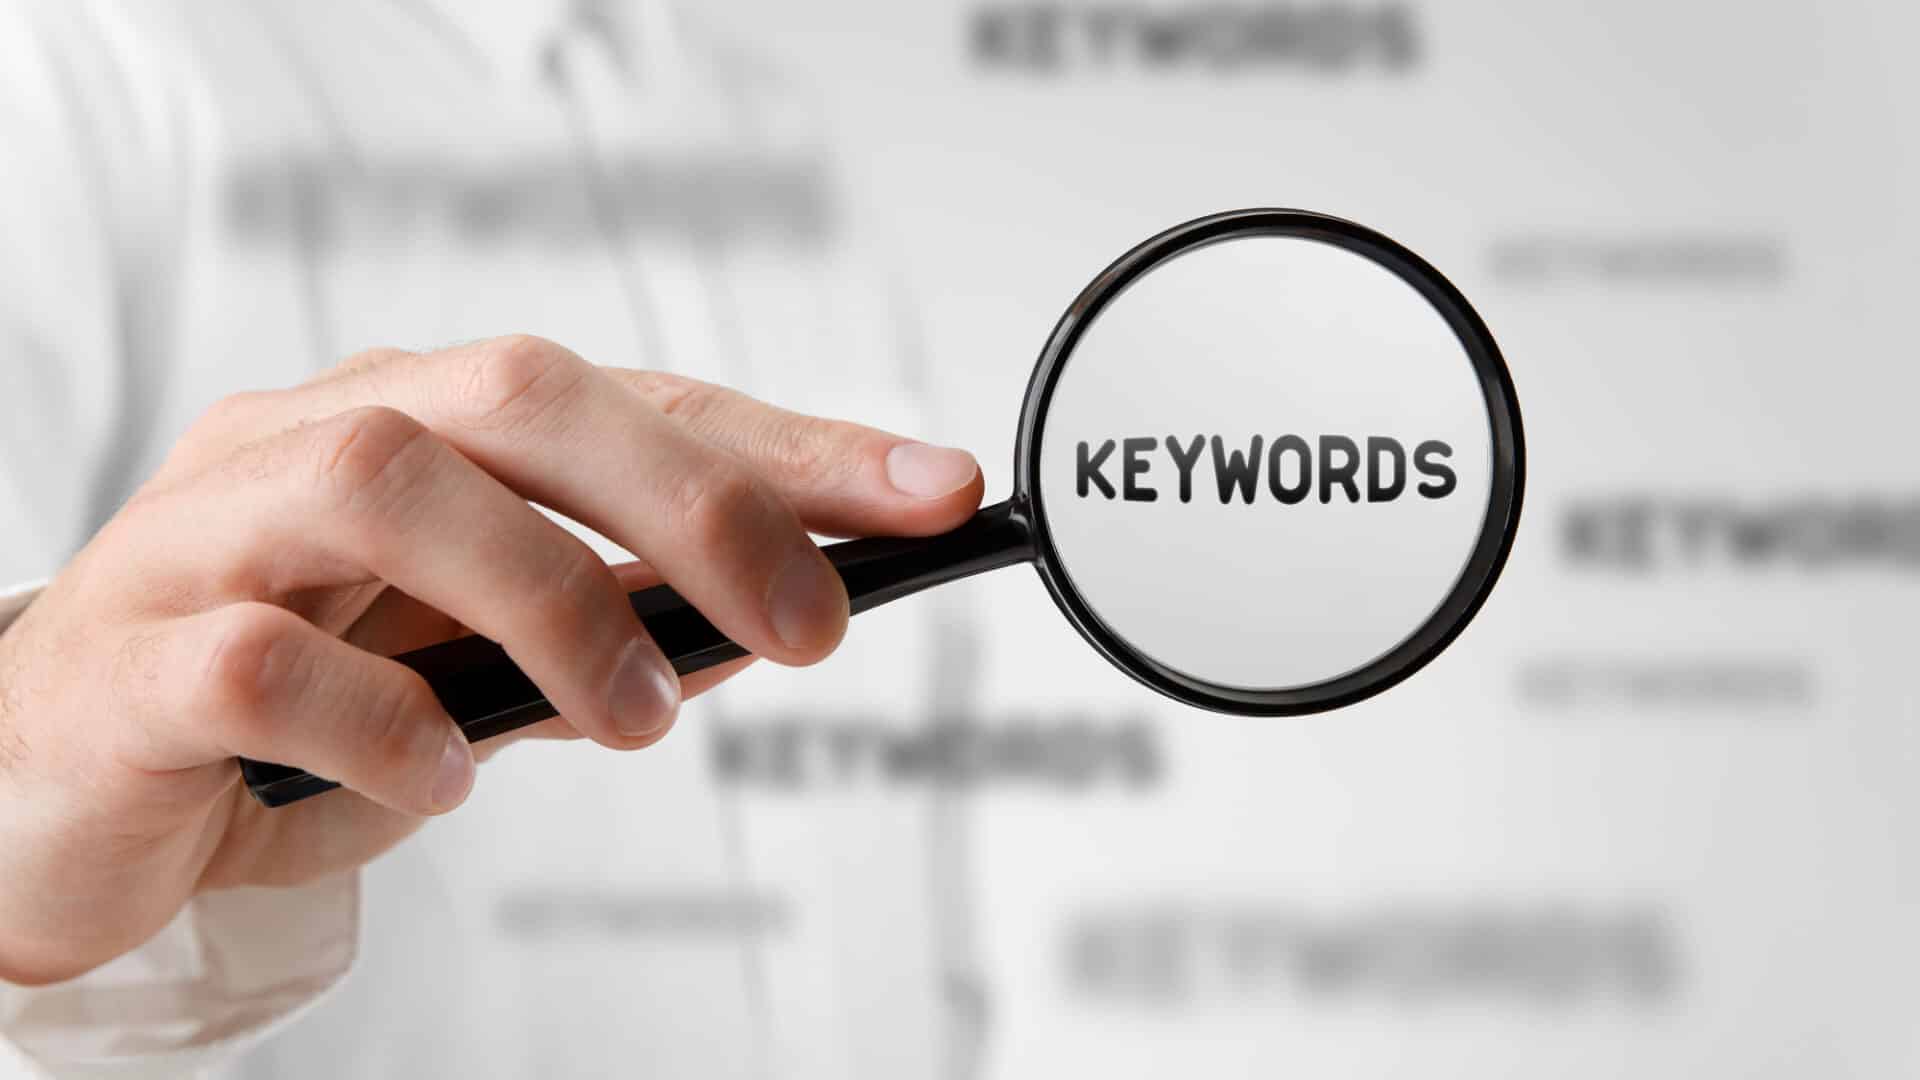 Beyond Keywords: Semantic Search and the Future of Content Optimization